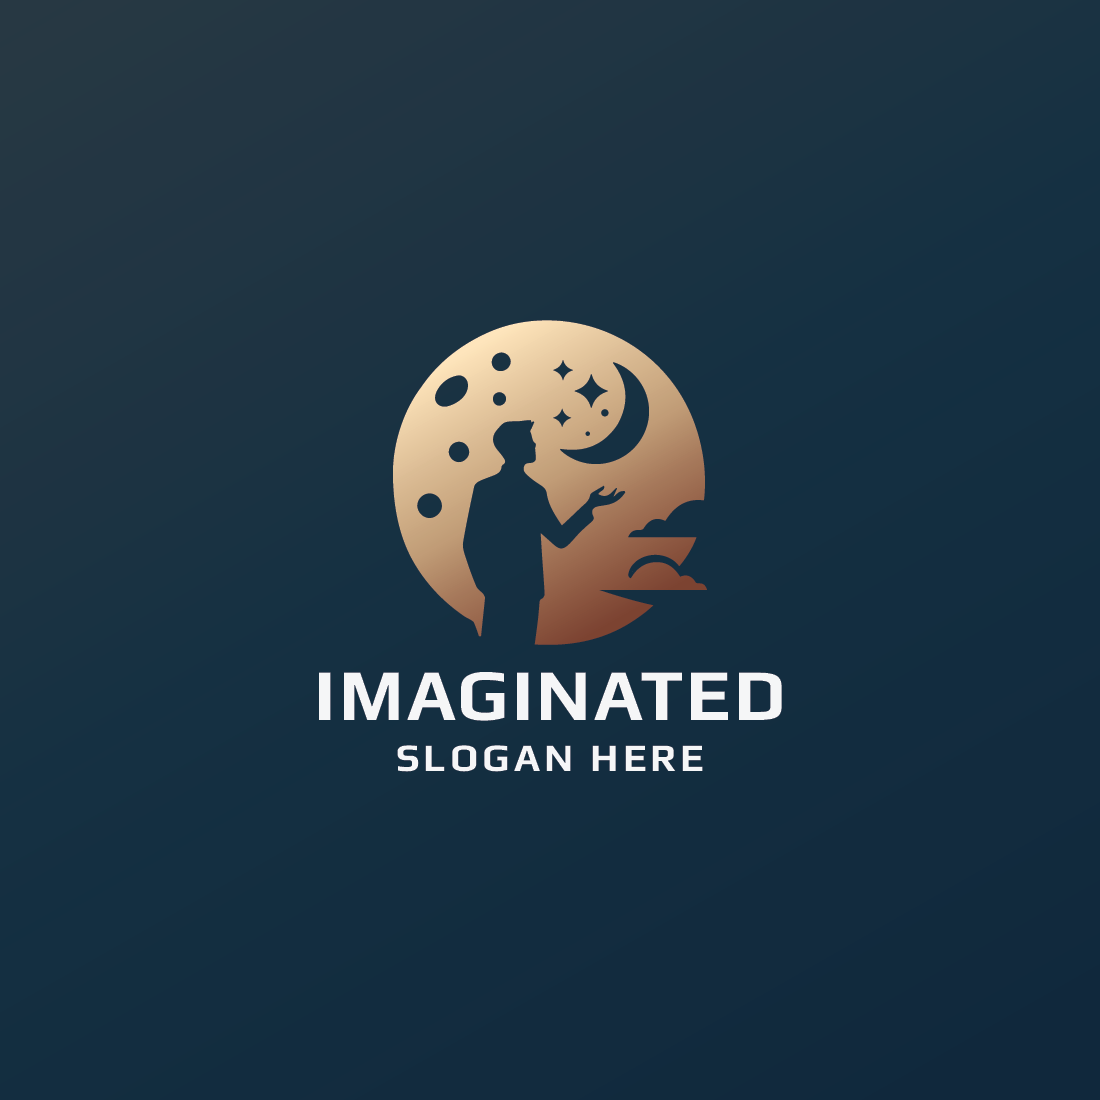 Imaginated Global Business Logo cover image.